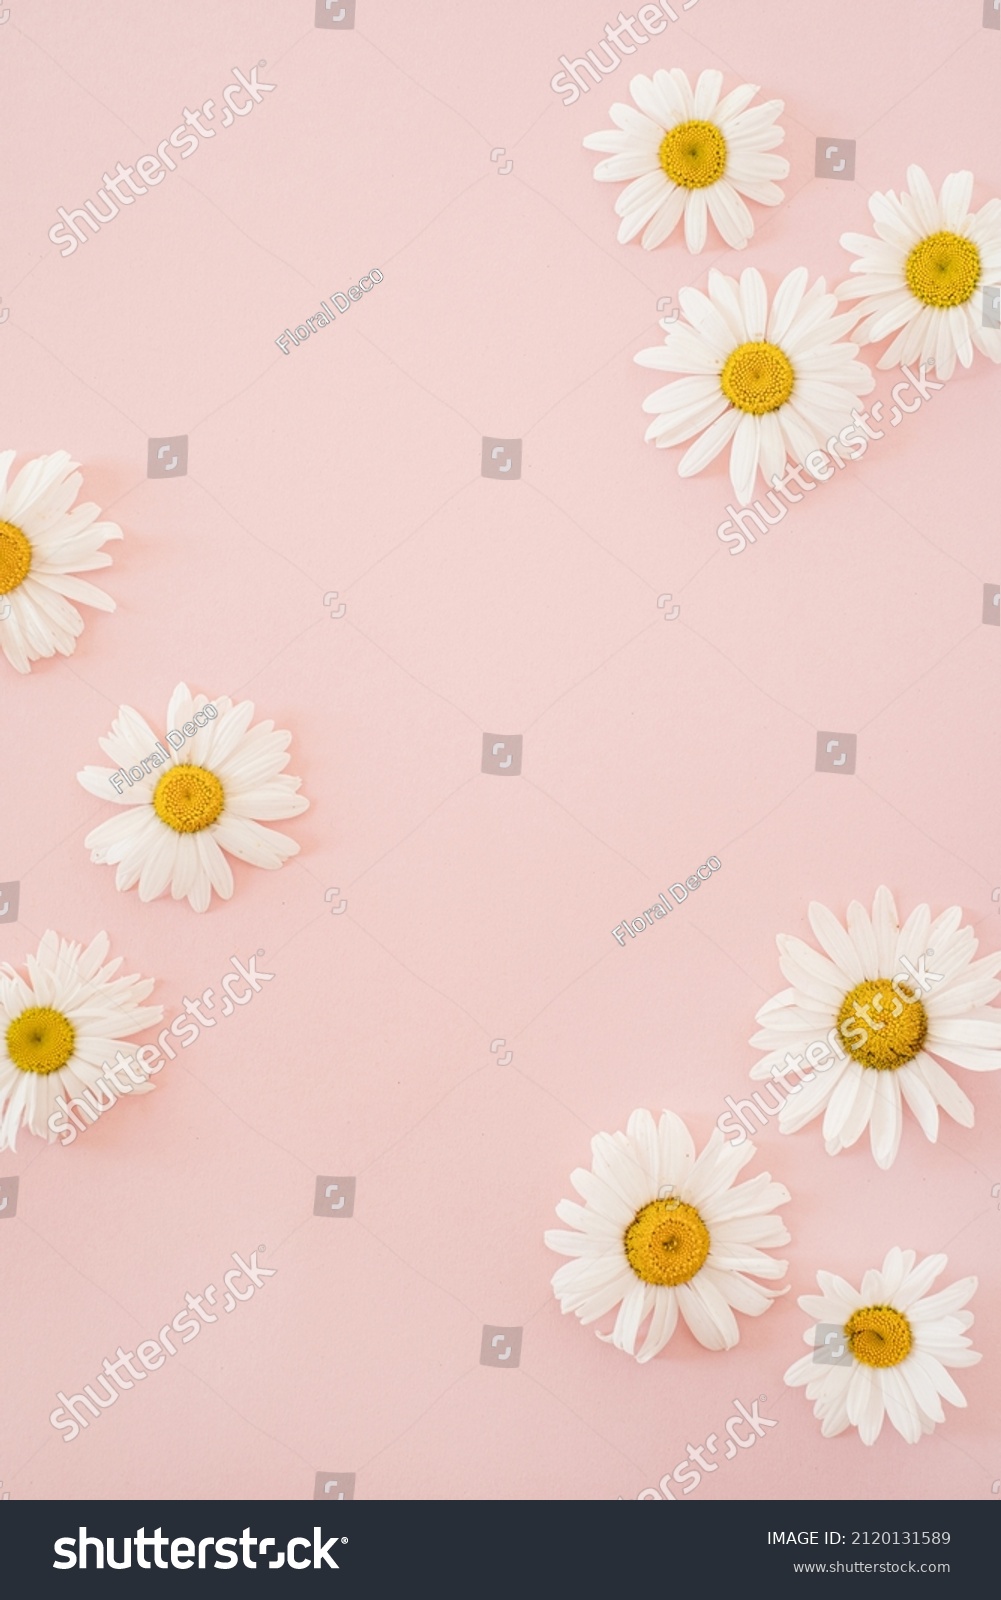 Beautiful chamomile daisy flower on neutral pink background. Minimalist floral concept with copy space. Creative still life summer, spring background #2120131589